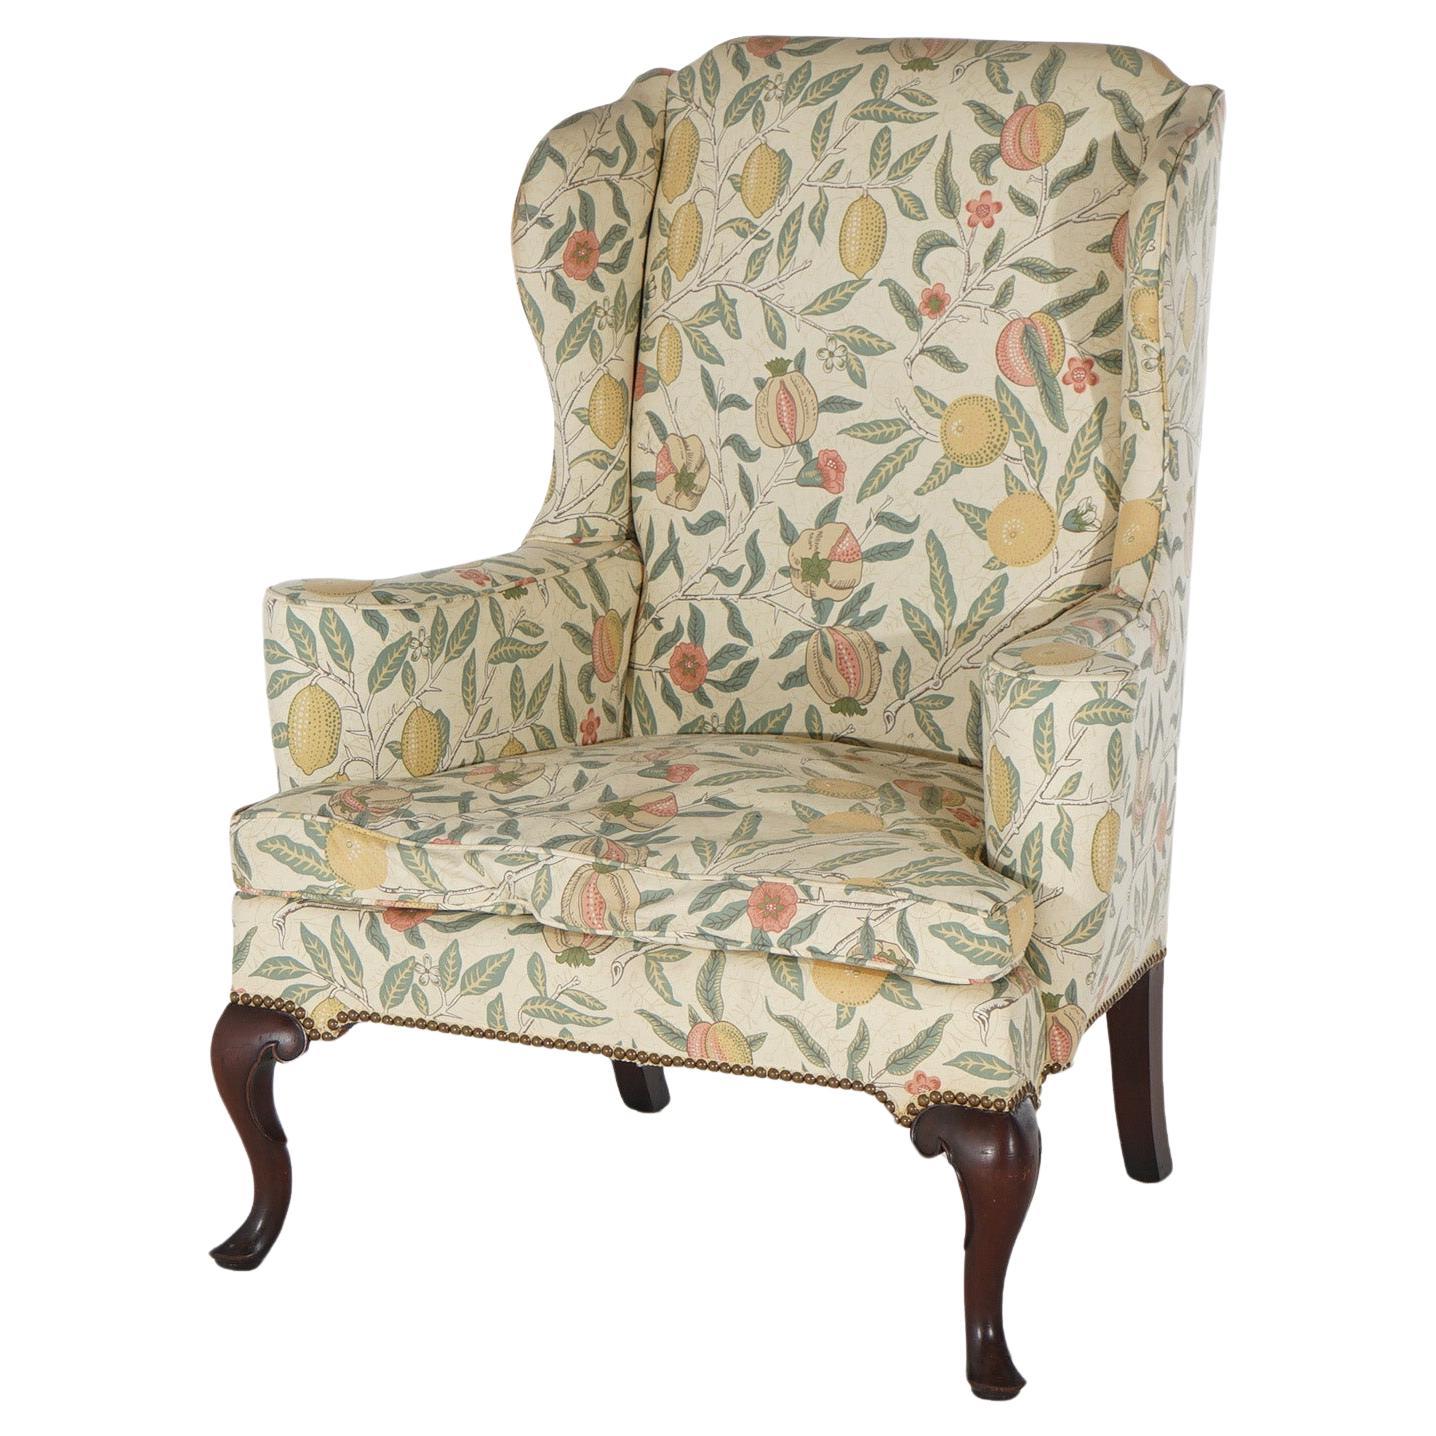 English Queen Anne Style Upholstered & Mahogany Fireside Wingback Chair 20th C For Sale